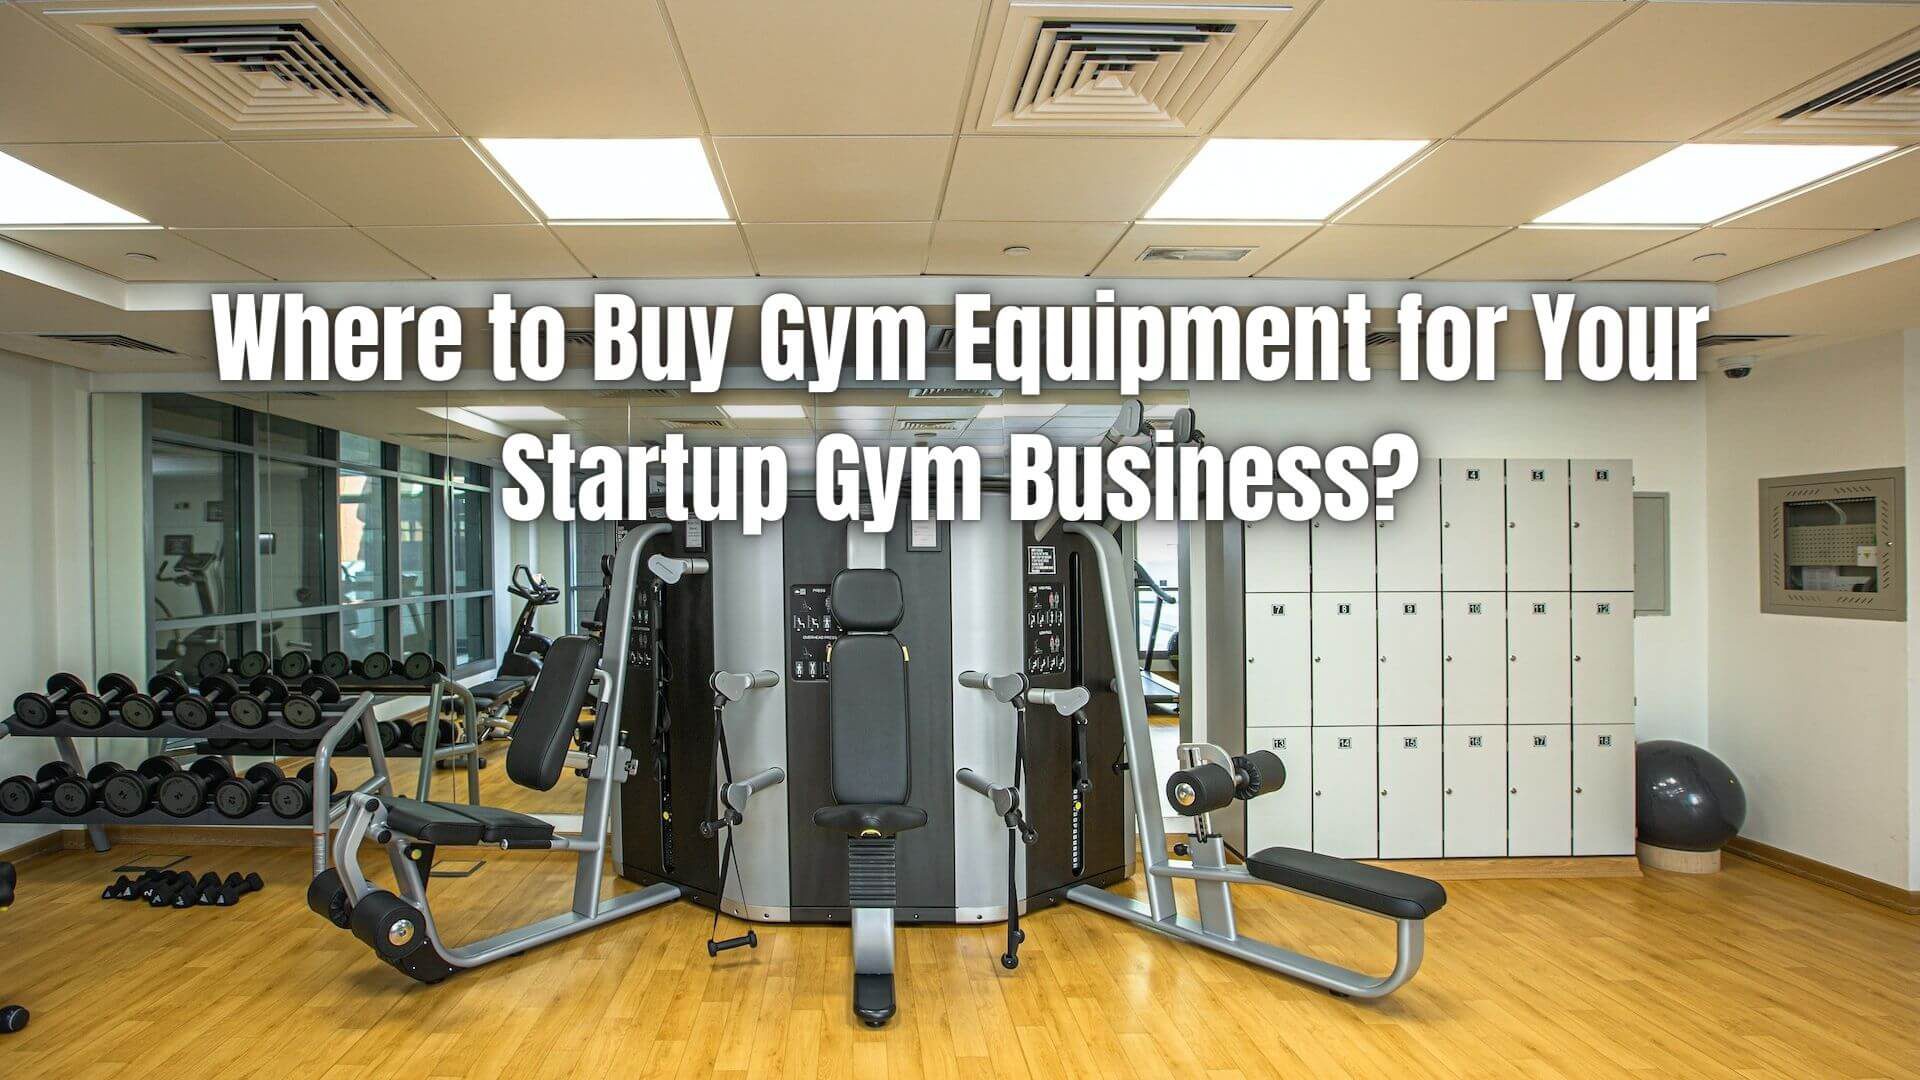 Fitness & Strength Training Equipment Store for Commercial Use